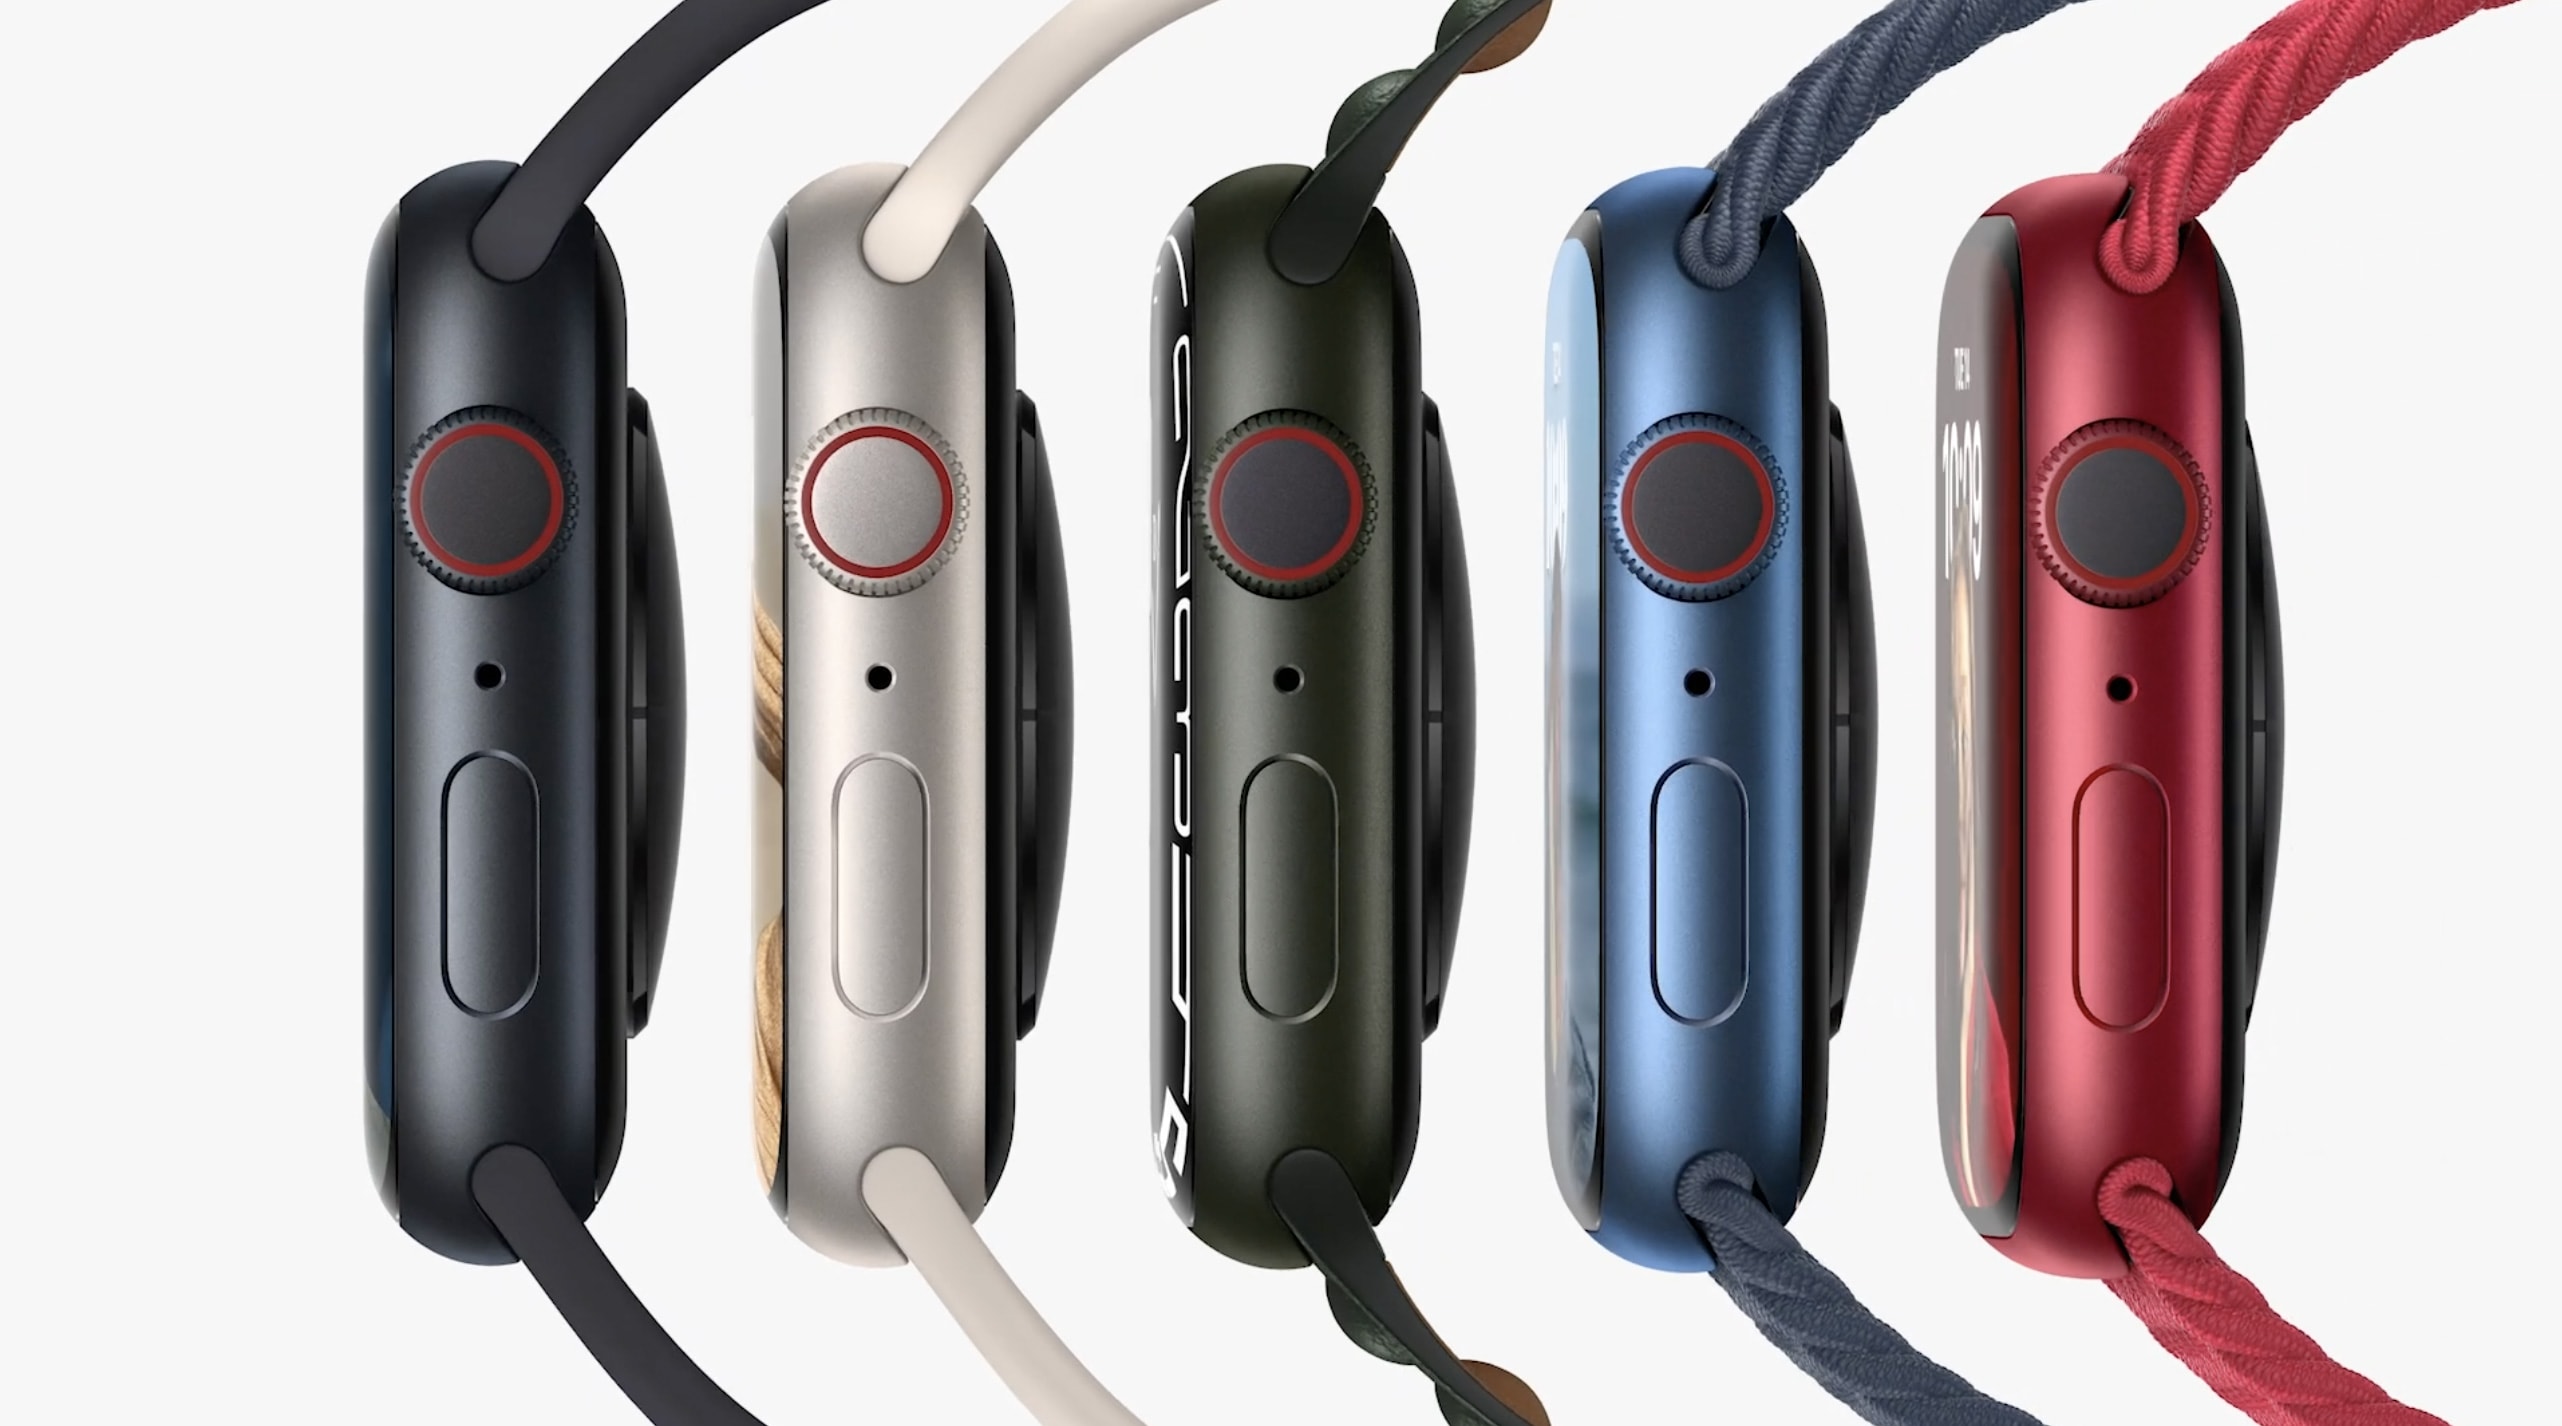 Apple Watch Series 7 color options are similar to Series 6